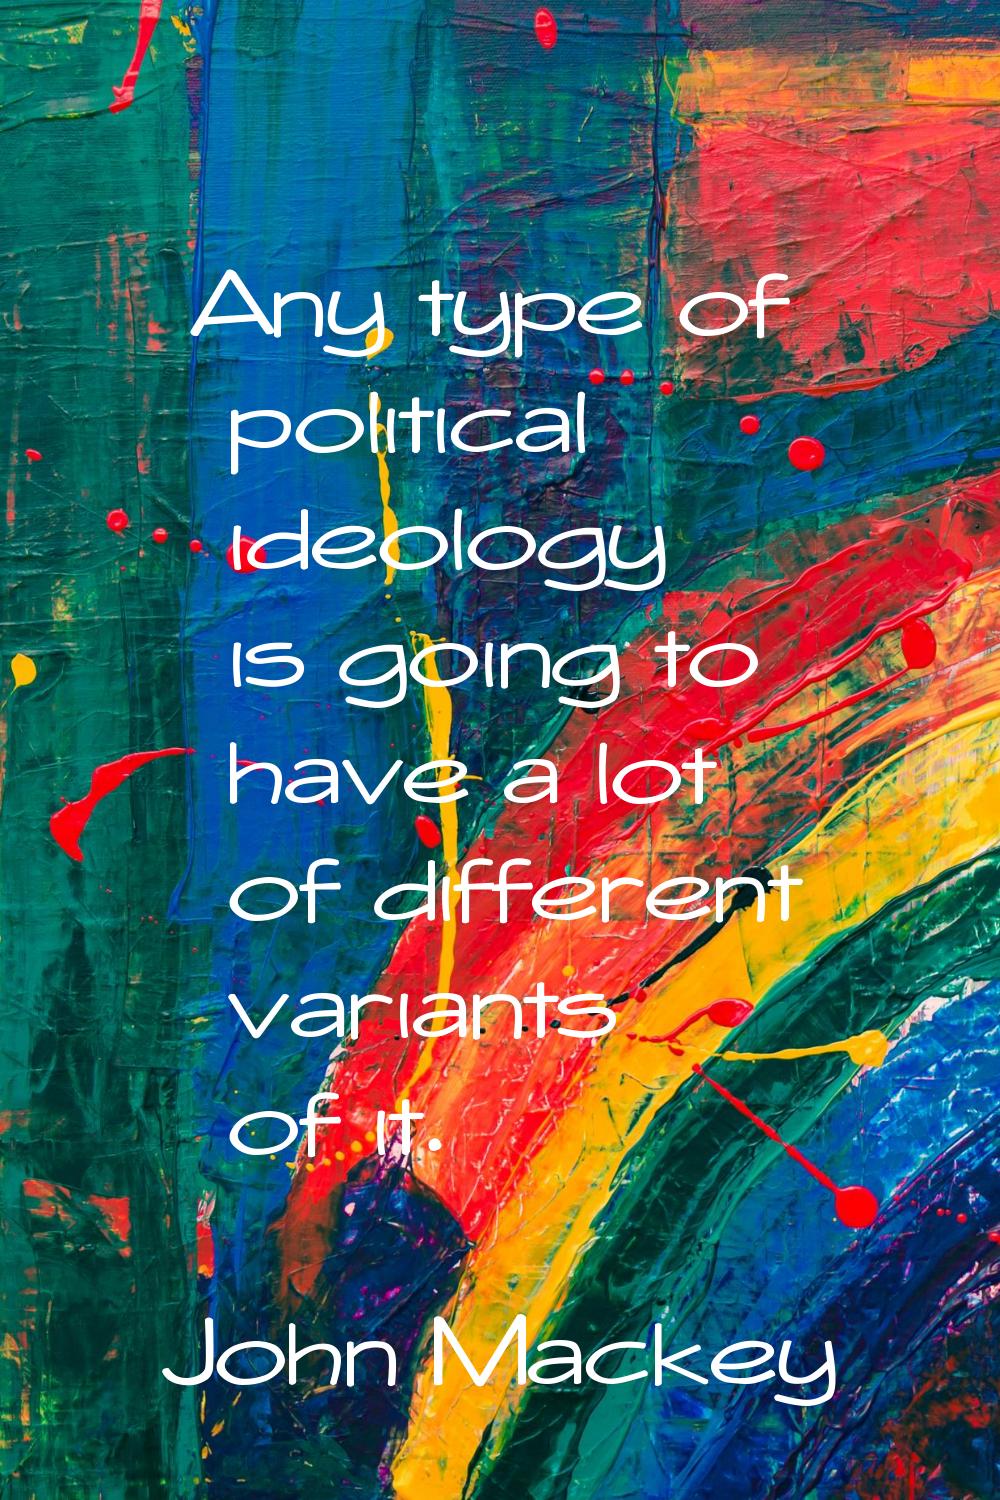 Any type of political ideology is going to have a lot of different variants of it.